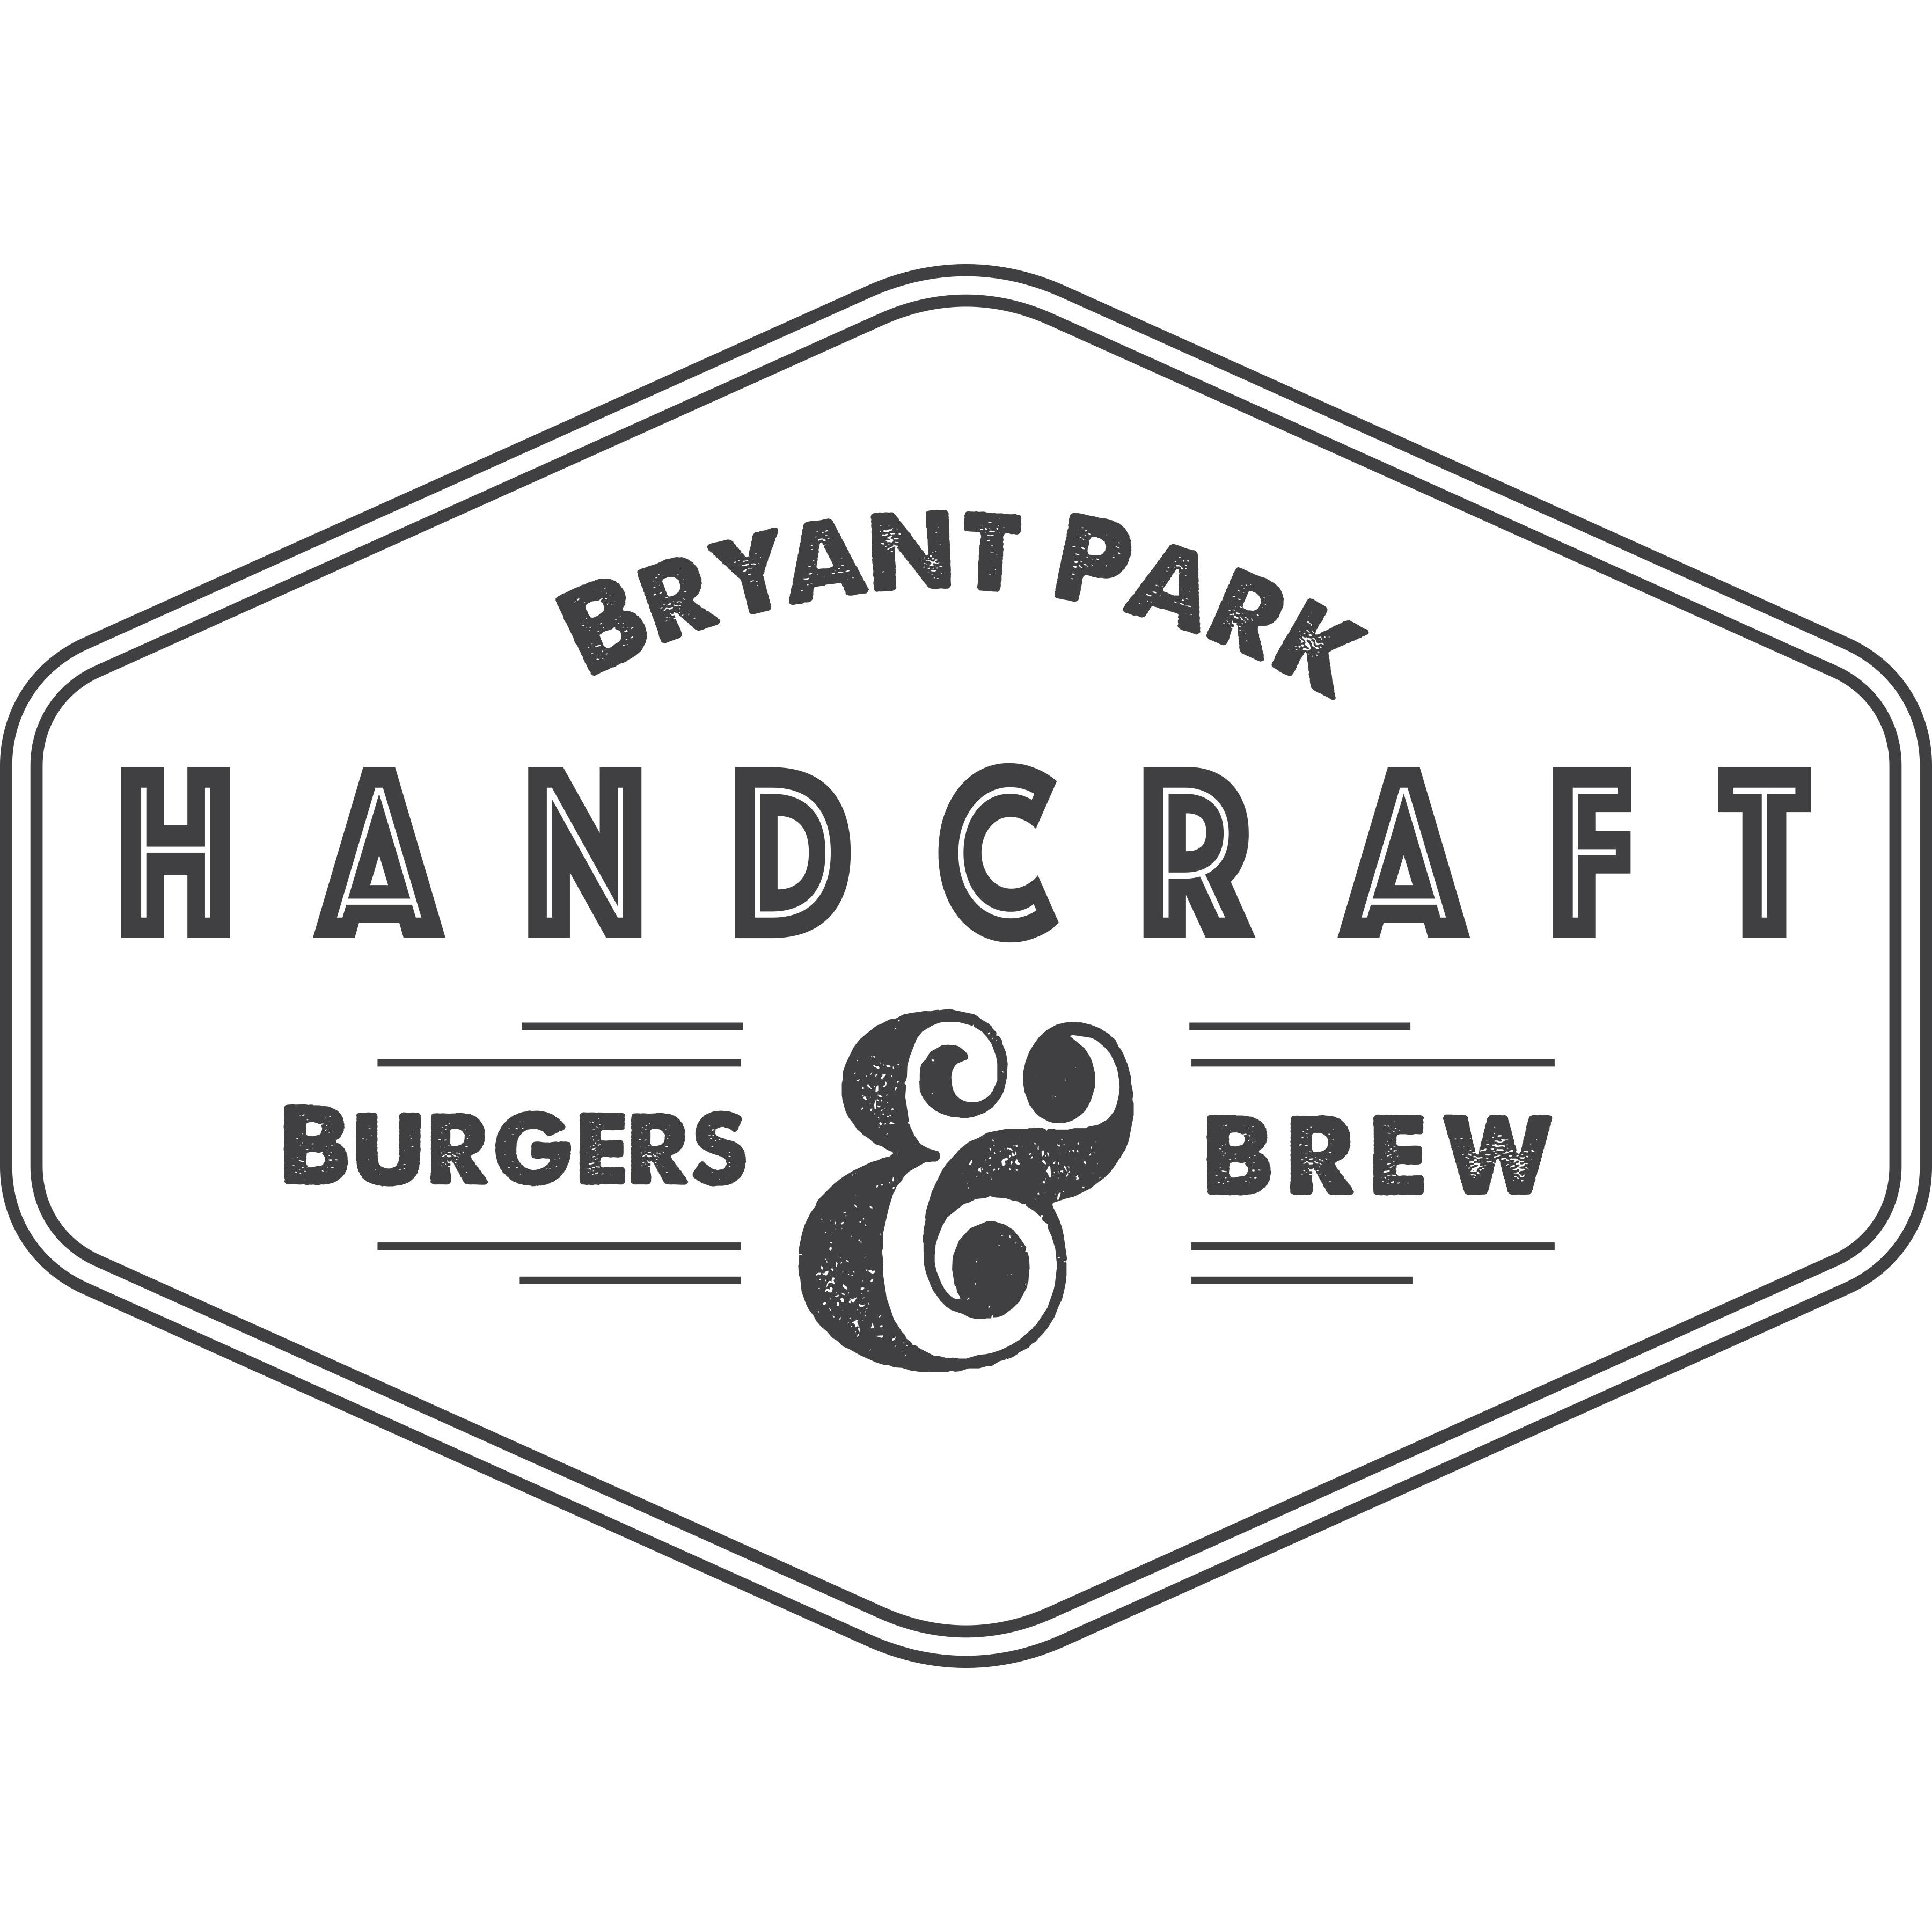 Handcraft Burgers and Brew